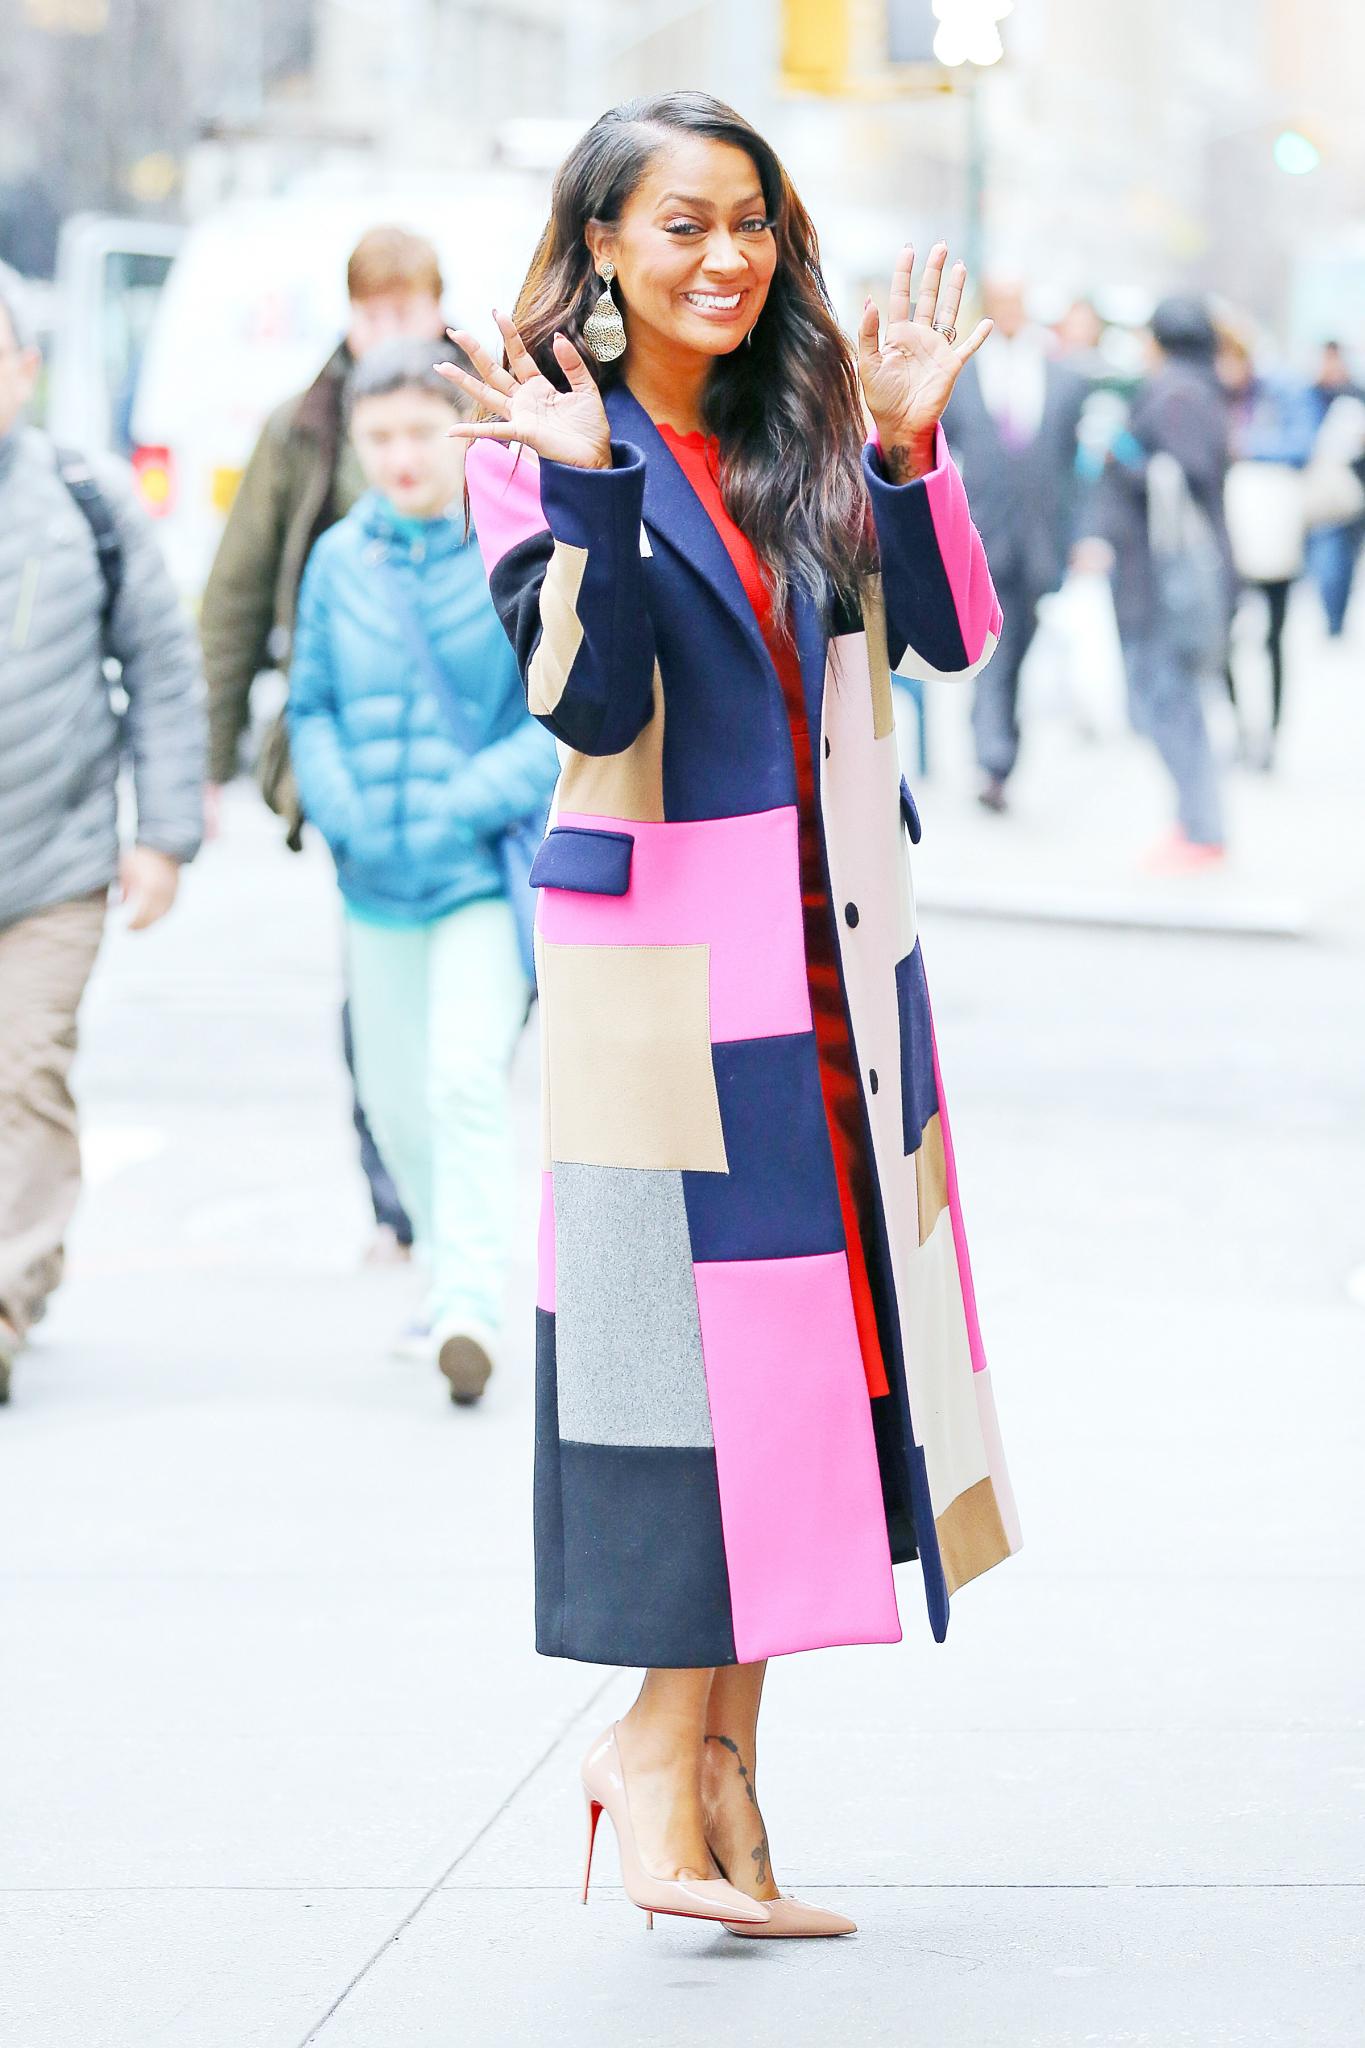 11 Ways to Make Your Outerwear the Star of the Show